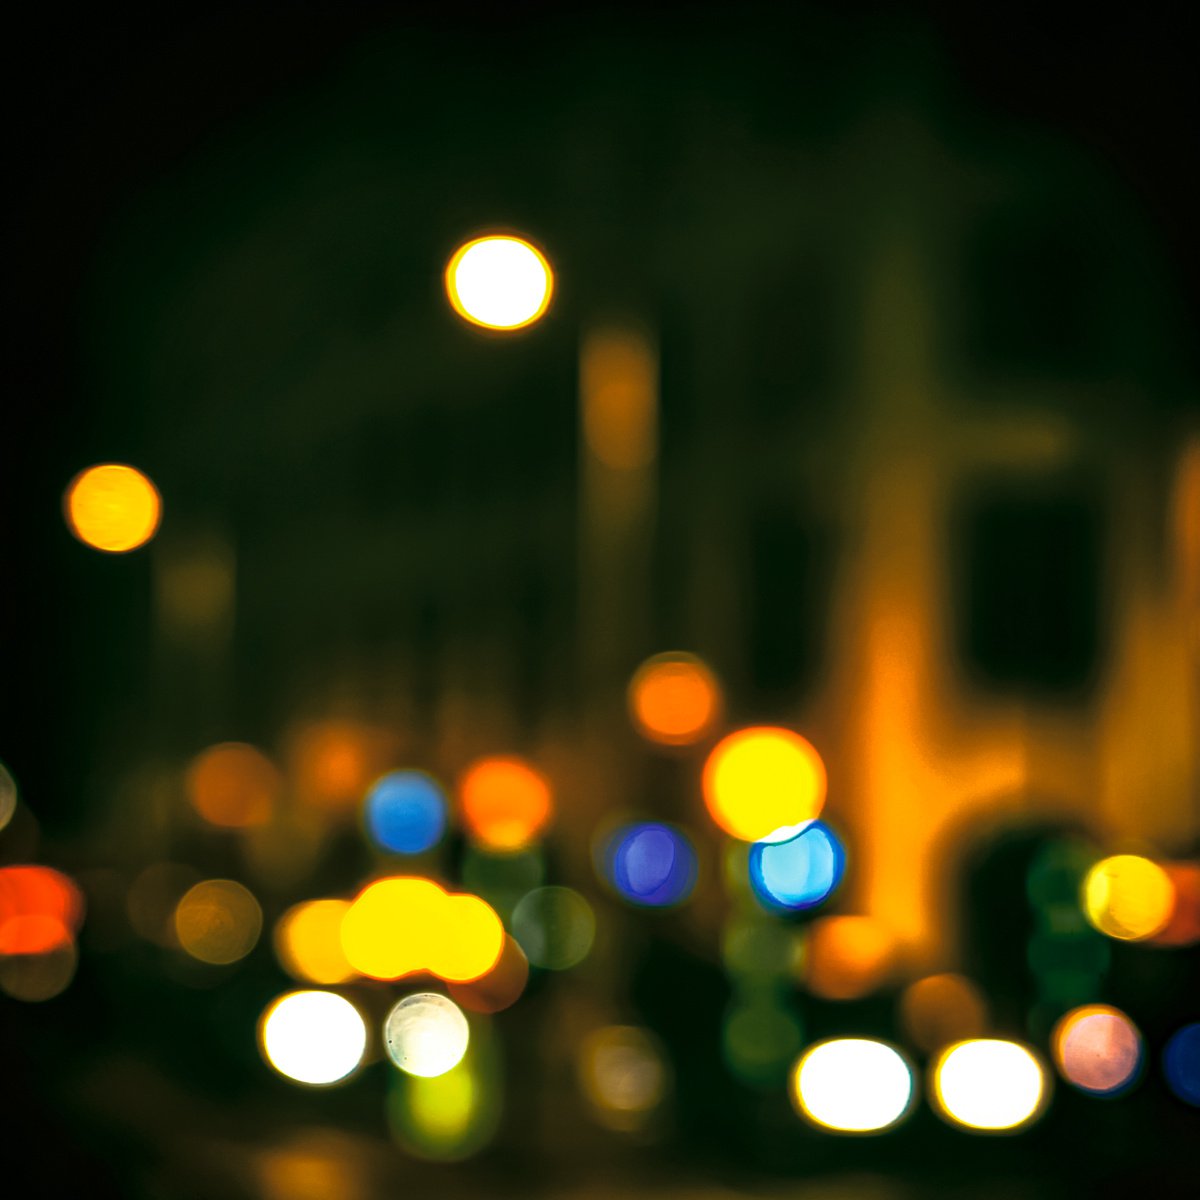 City Lights 4. Limited Edition Abstract Photograph Print #1/15. Nighttime abstract photog... by Graham Briggs